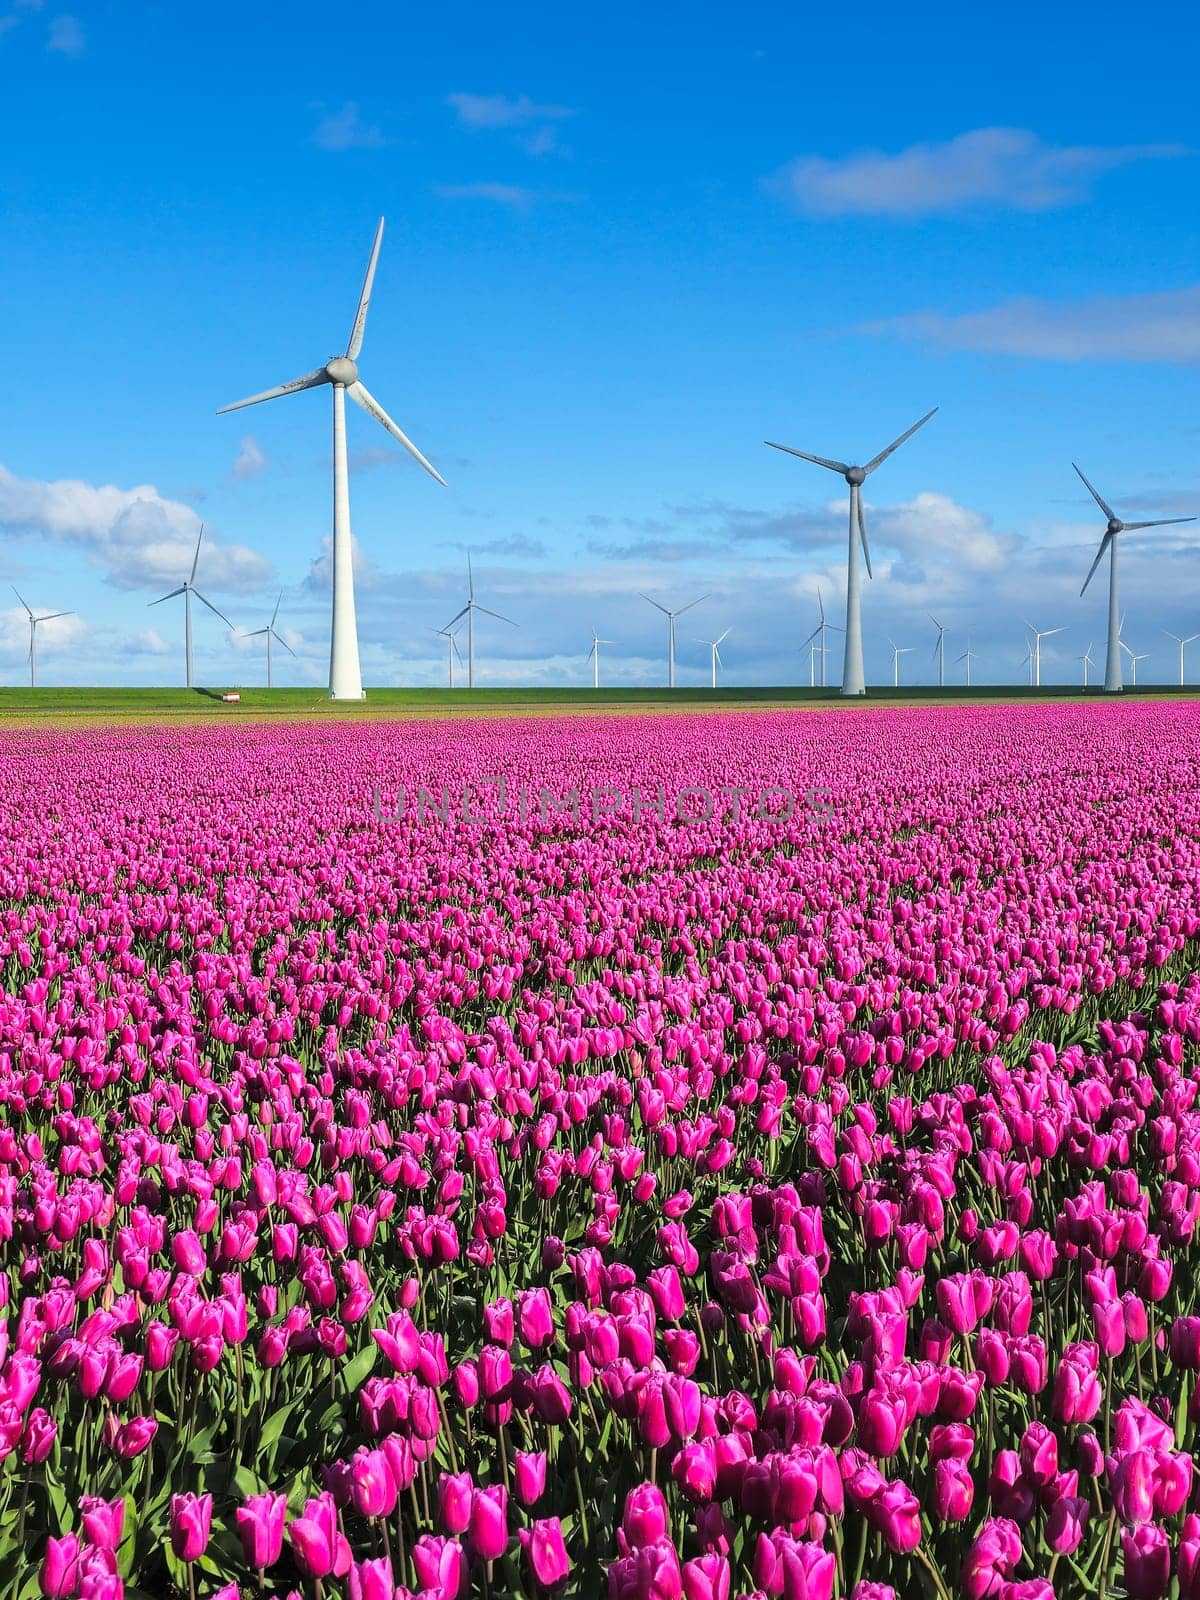 A vibrant field of purple tulips stretches into the distance, with majestic windmills spinning in the background under a clear Spring sky by fokkebok